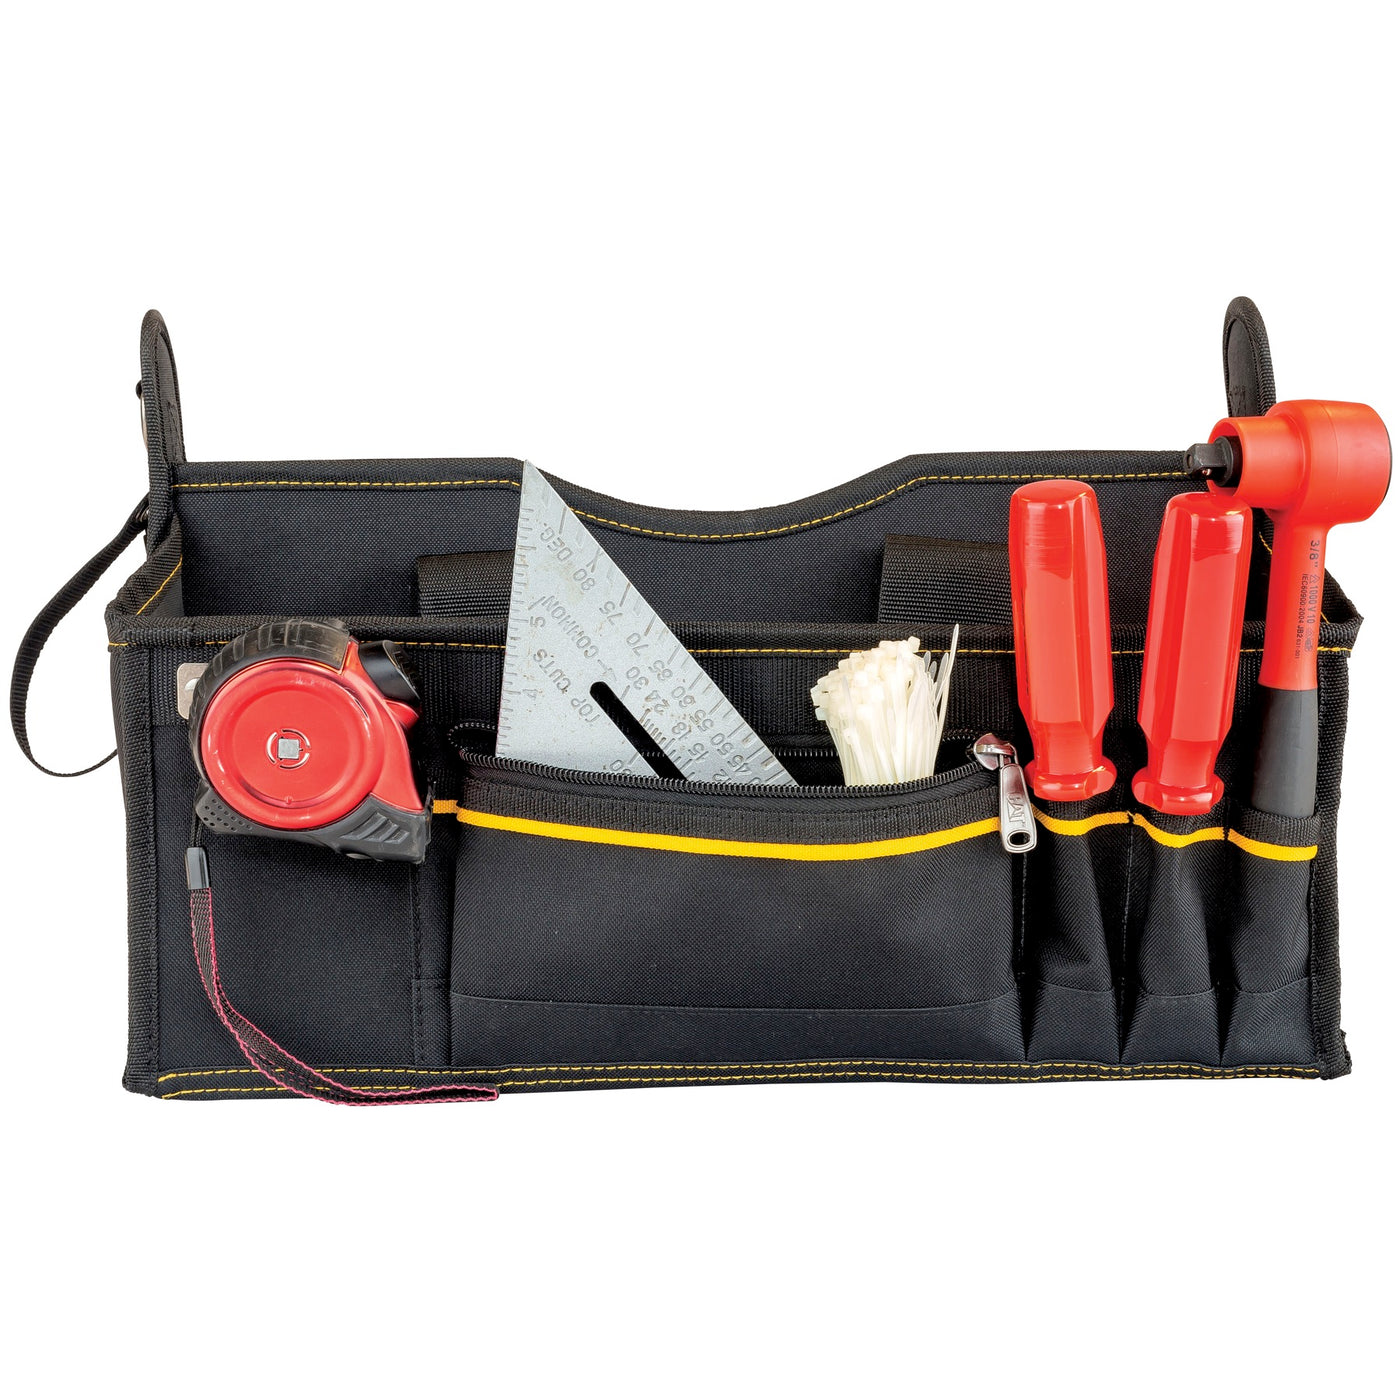 17 in. Tech Tool Tote